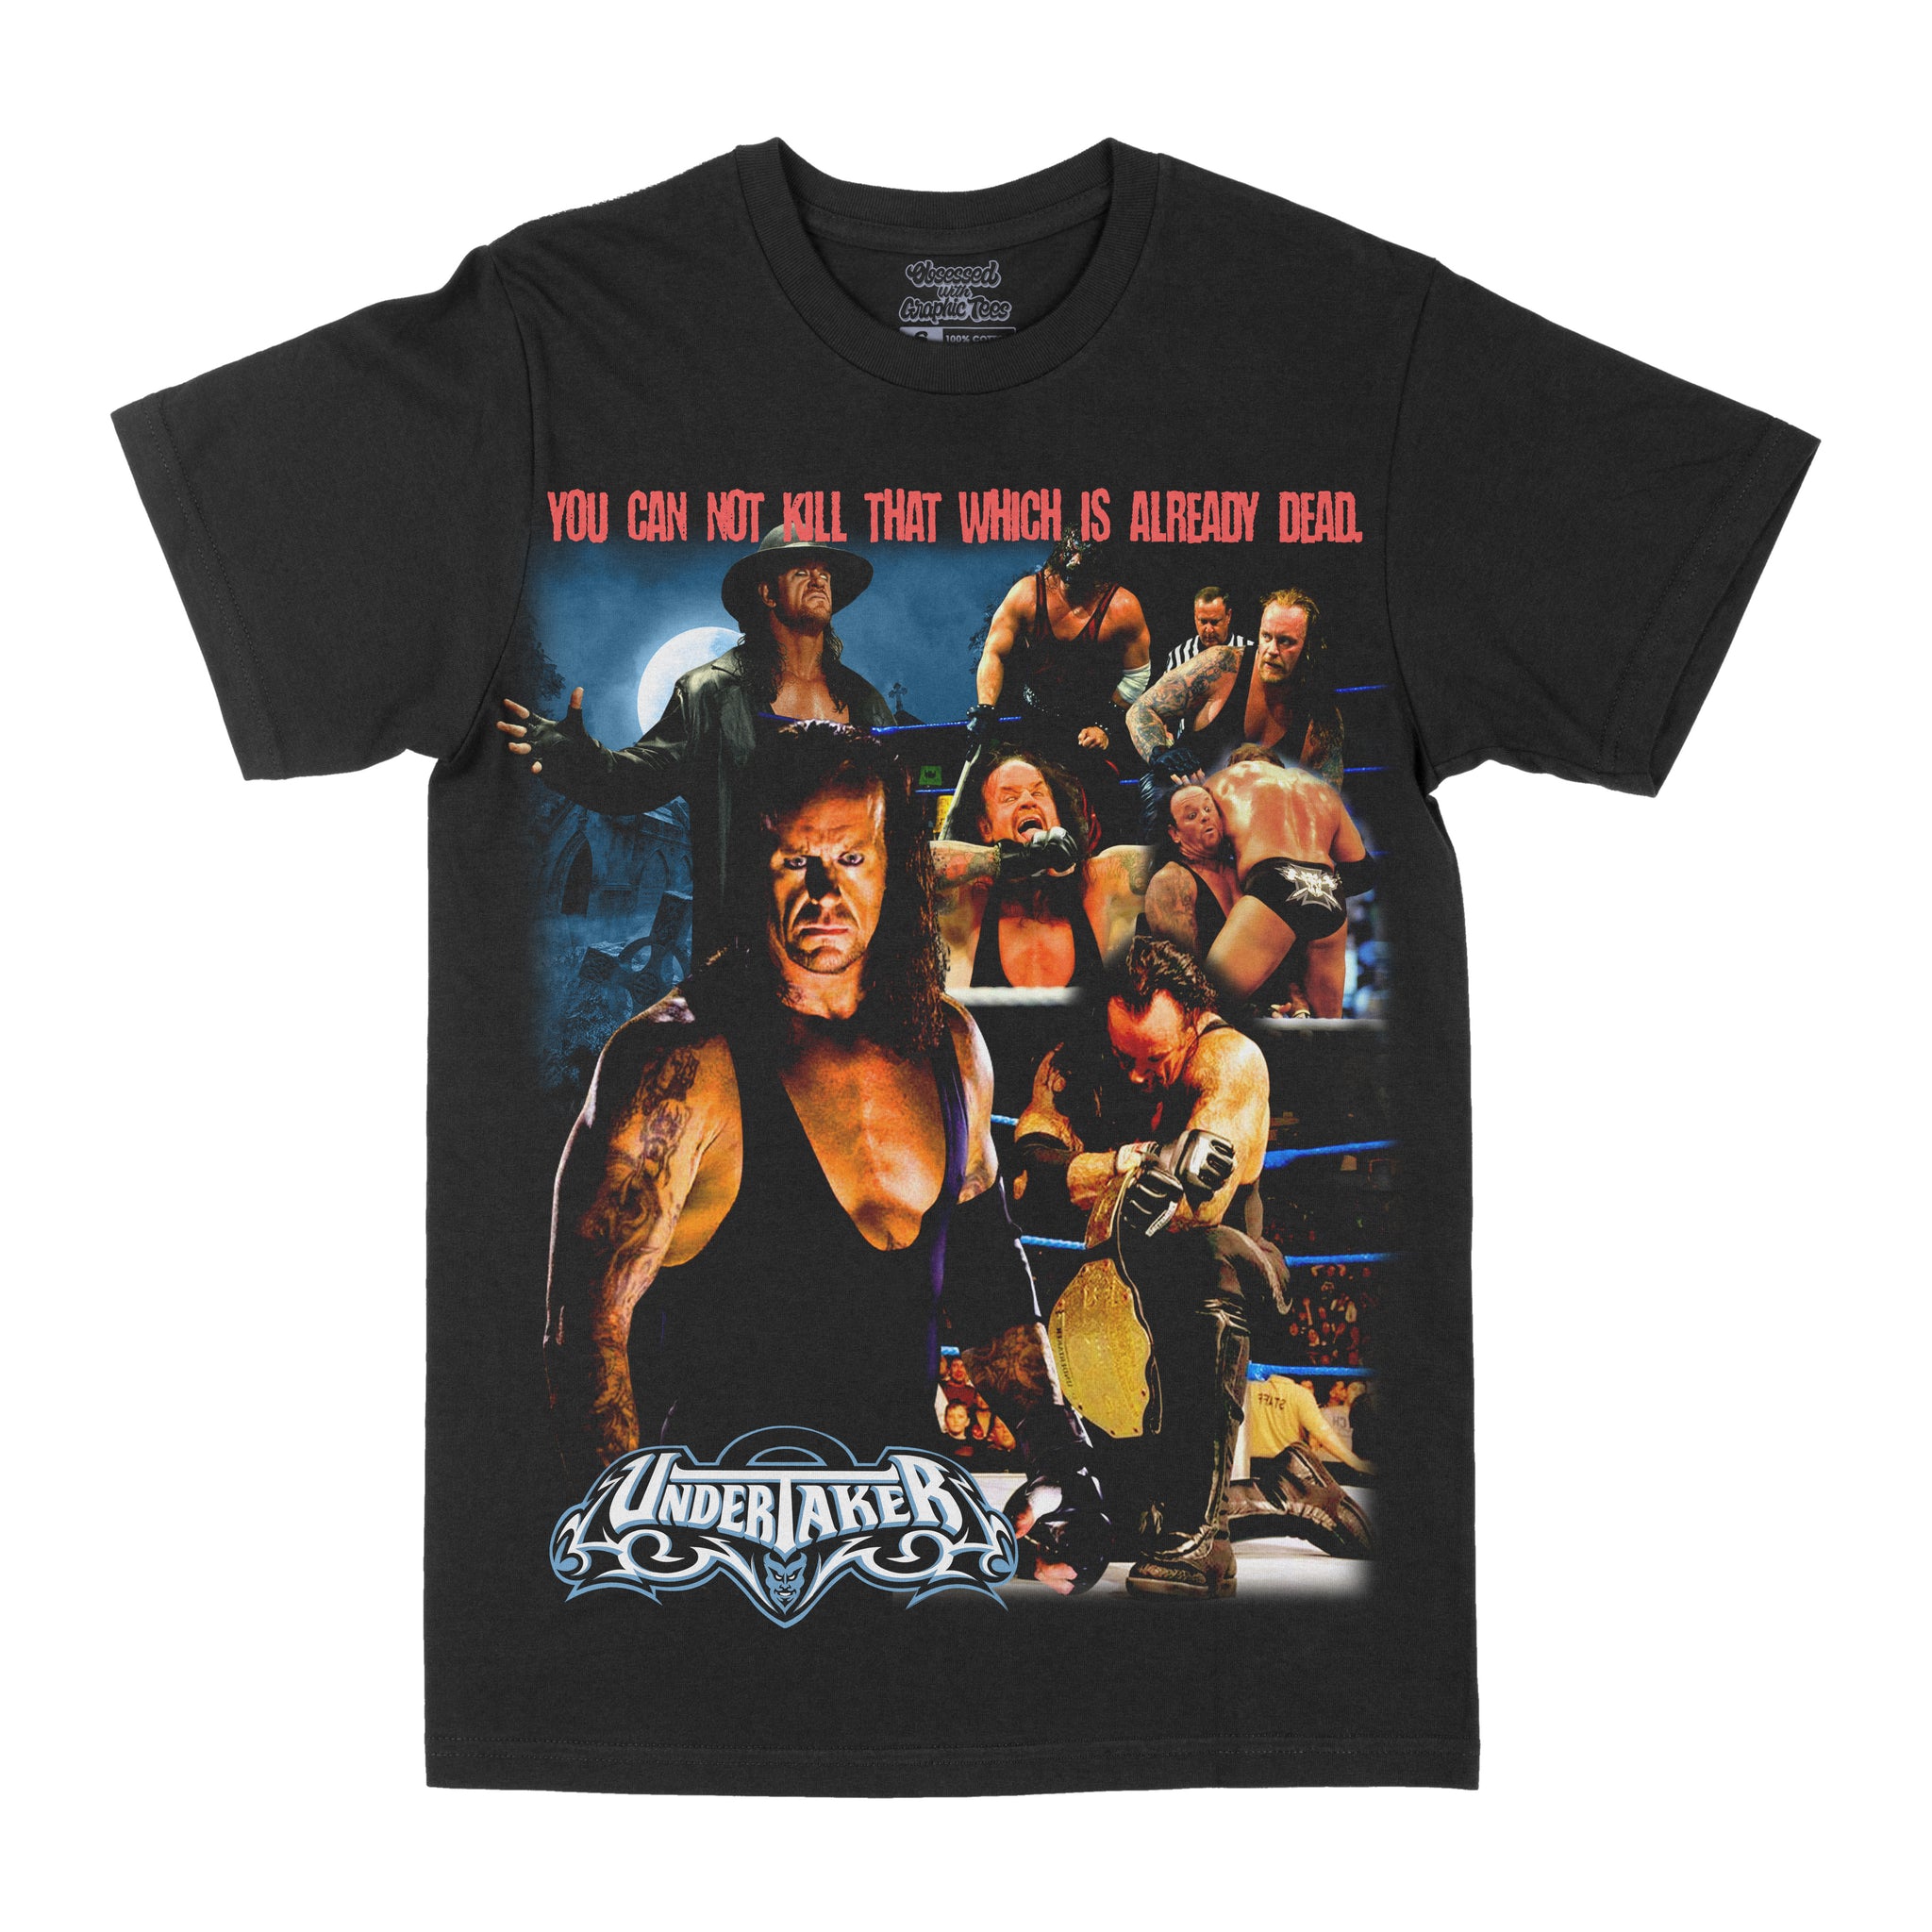 The Undertaker  "Already Dead" Graphic Tee